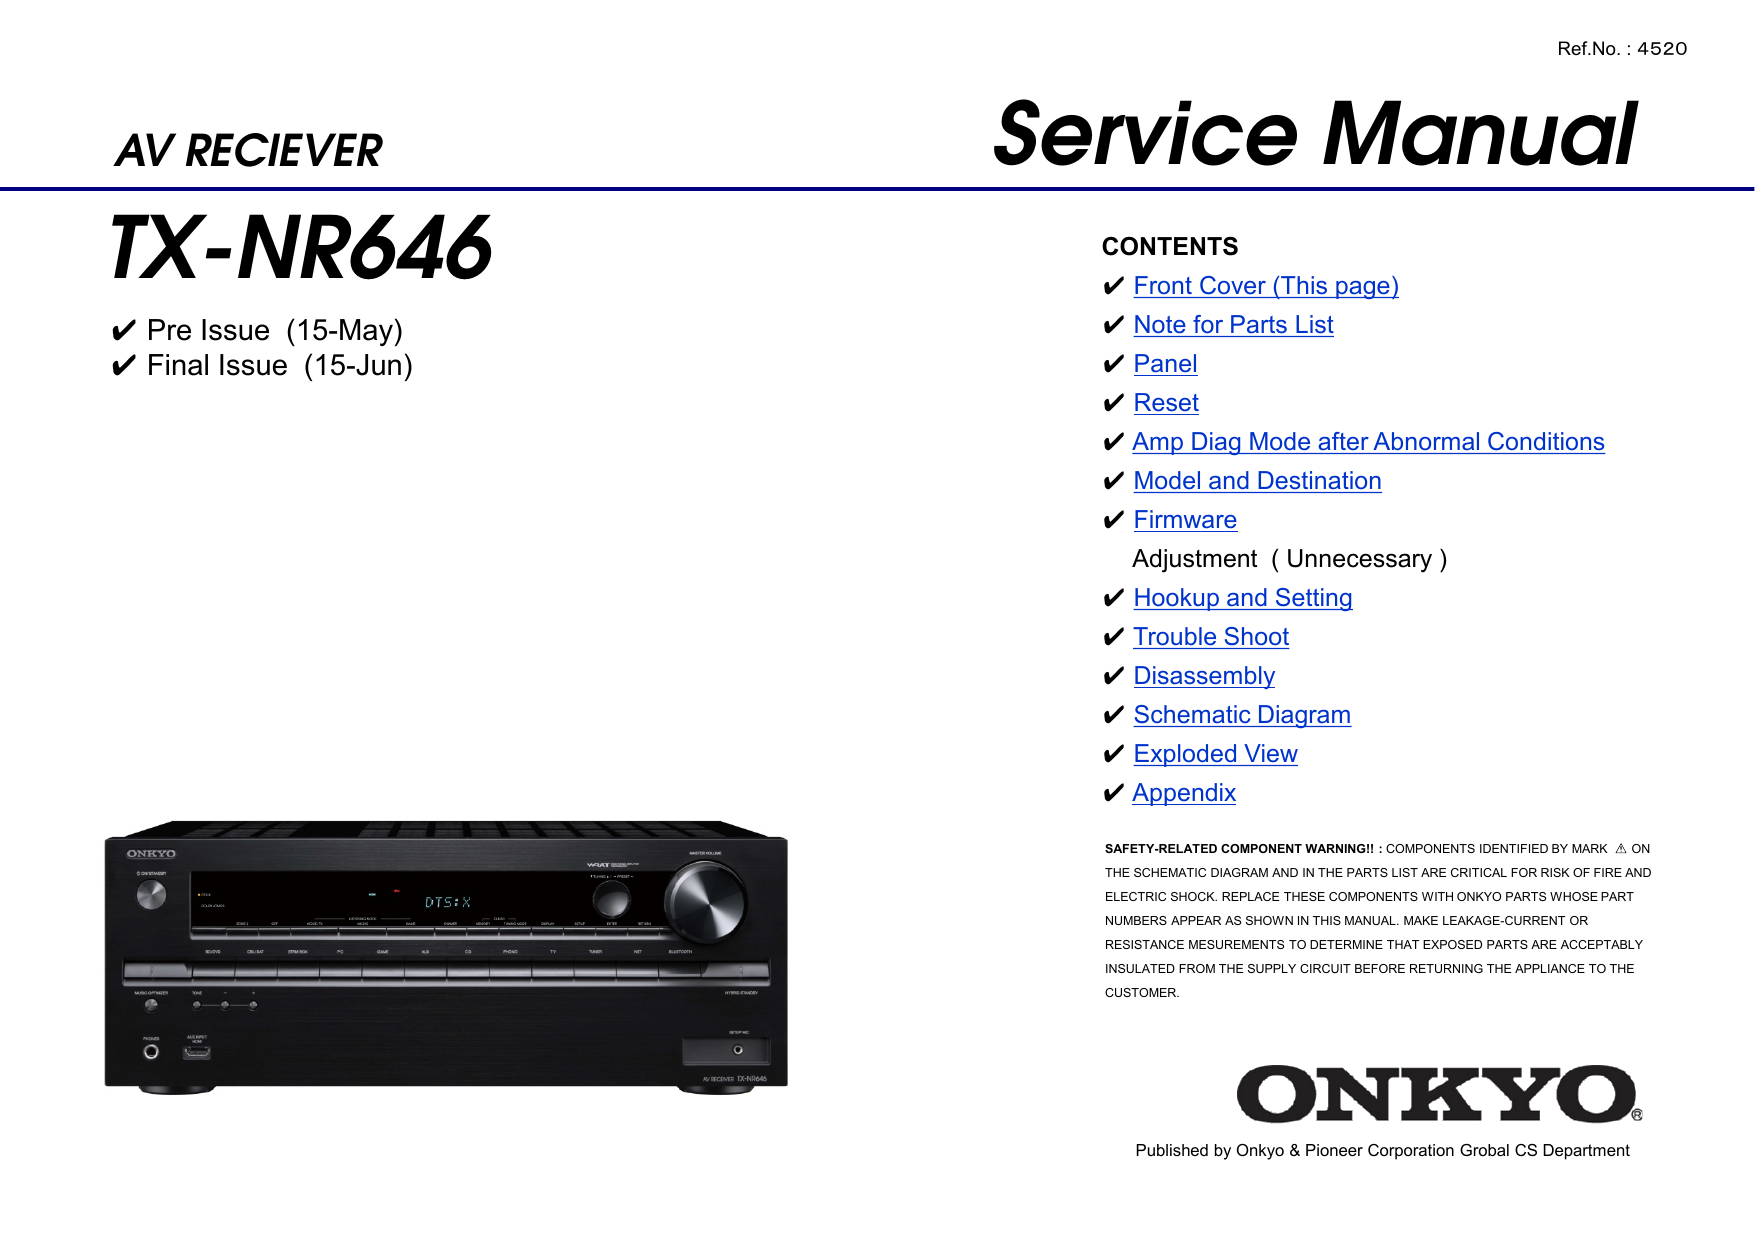 Onkyo Service Manual for the TX-36 Tuner Amplifier Amp Receiver ~ Repair Manual 